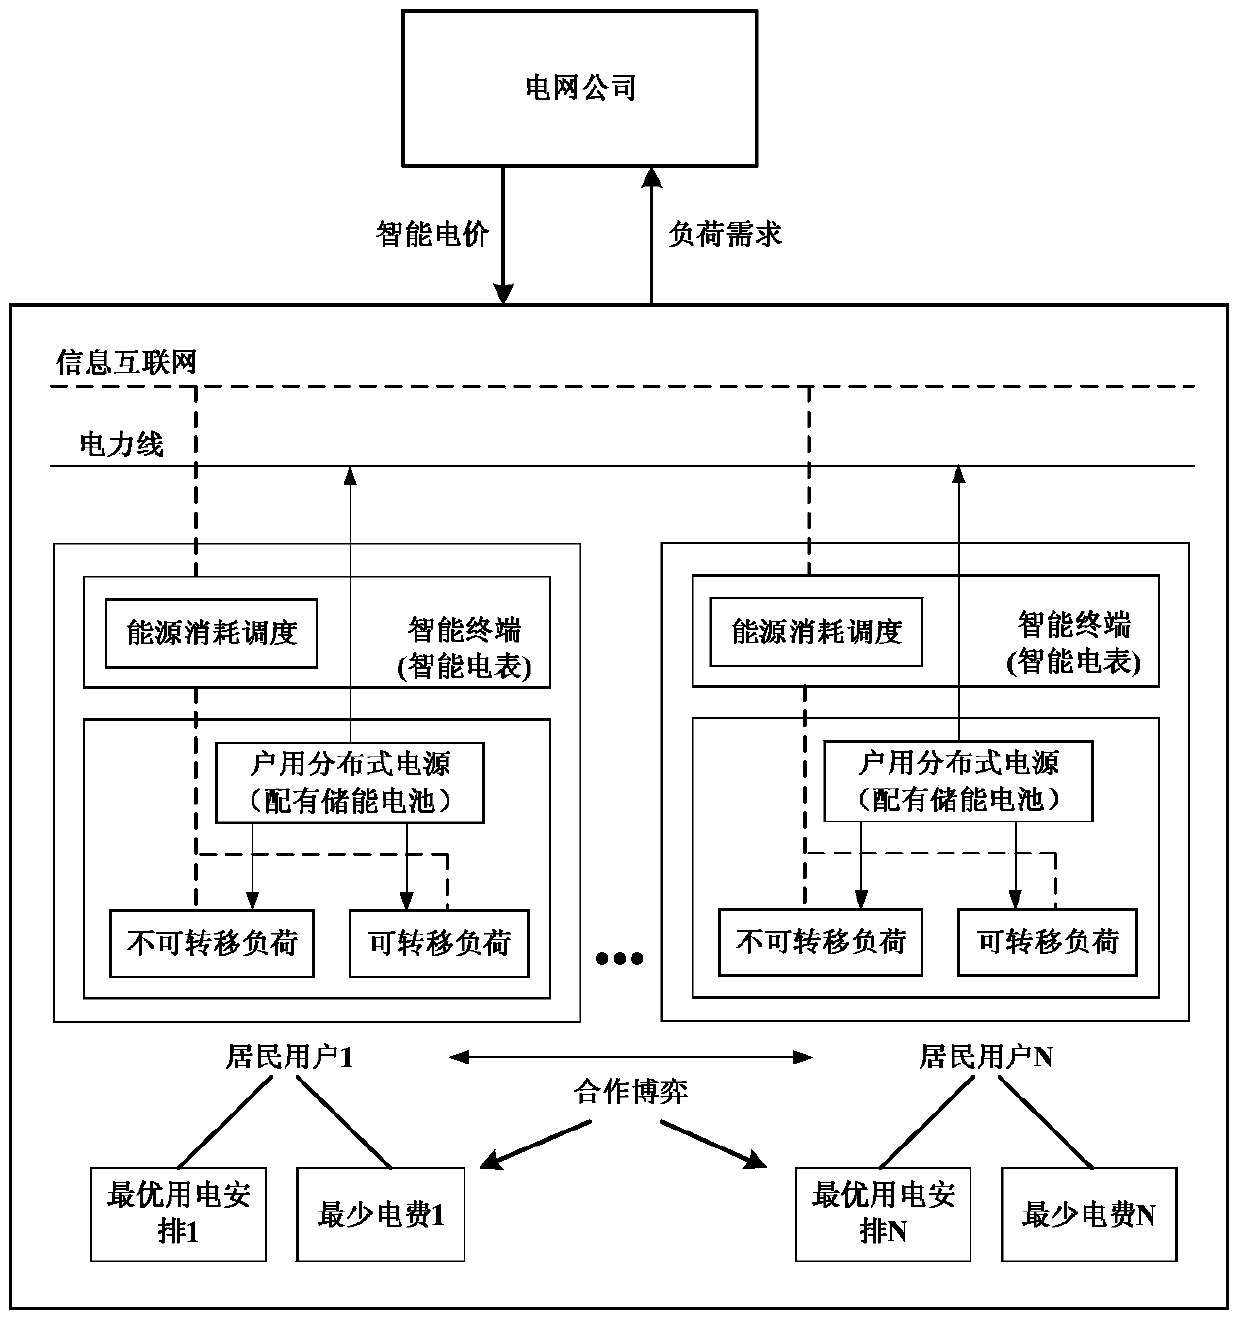 Electricity arrangement method for resident user cooperation gaming in consideration of household distributed power supply